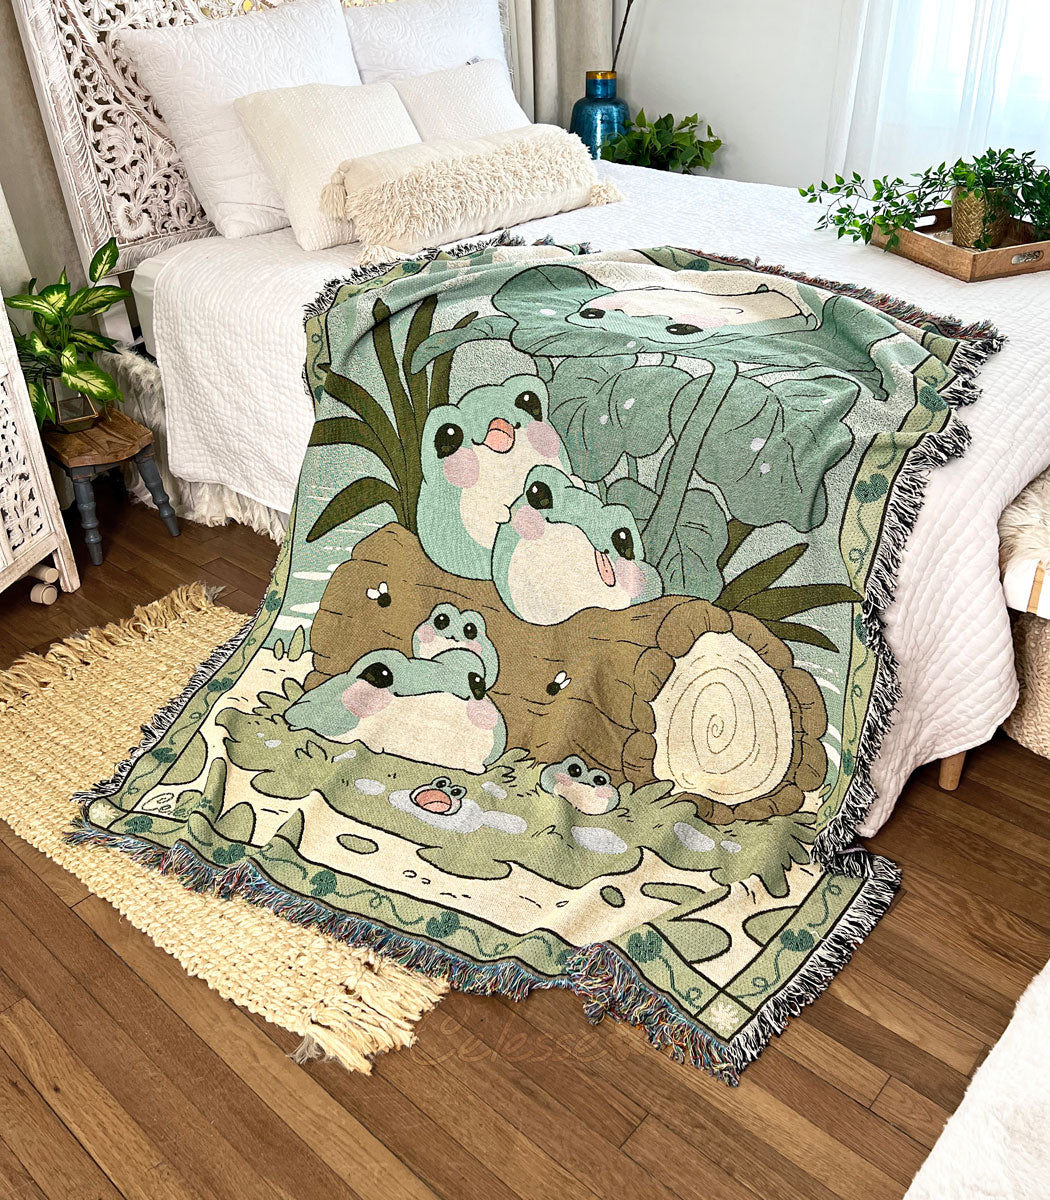 Blobfrogs Frogs Woven Blanket Throw Tapestry